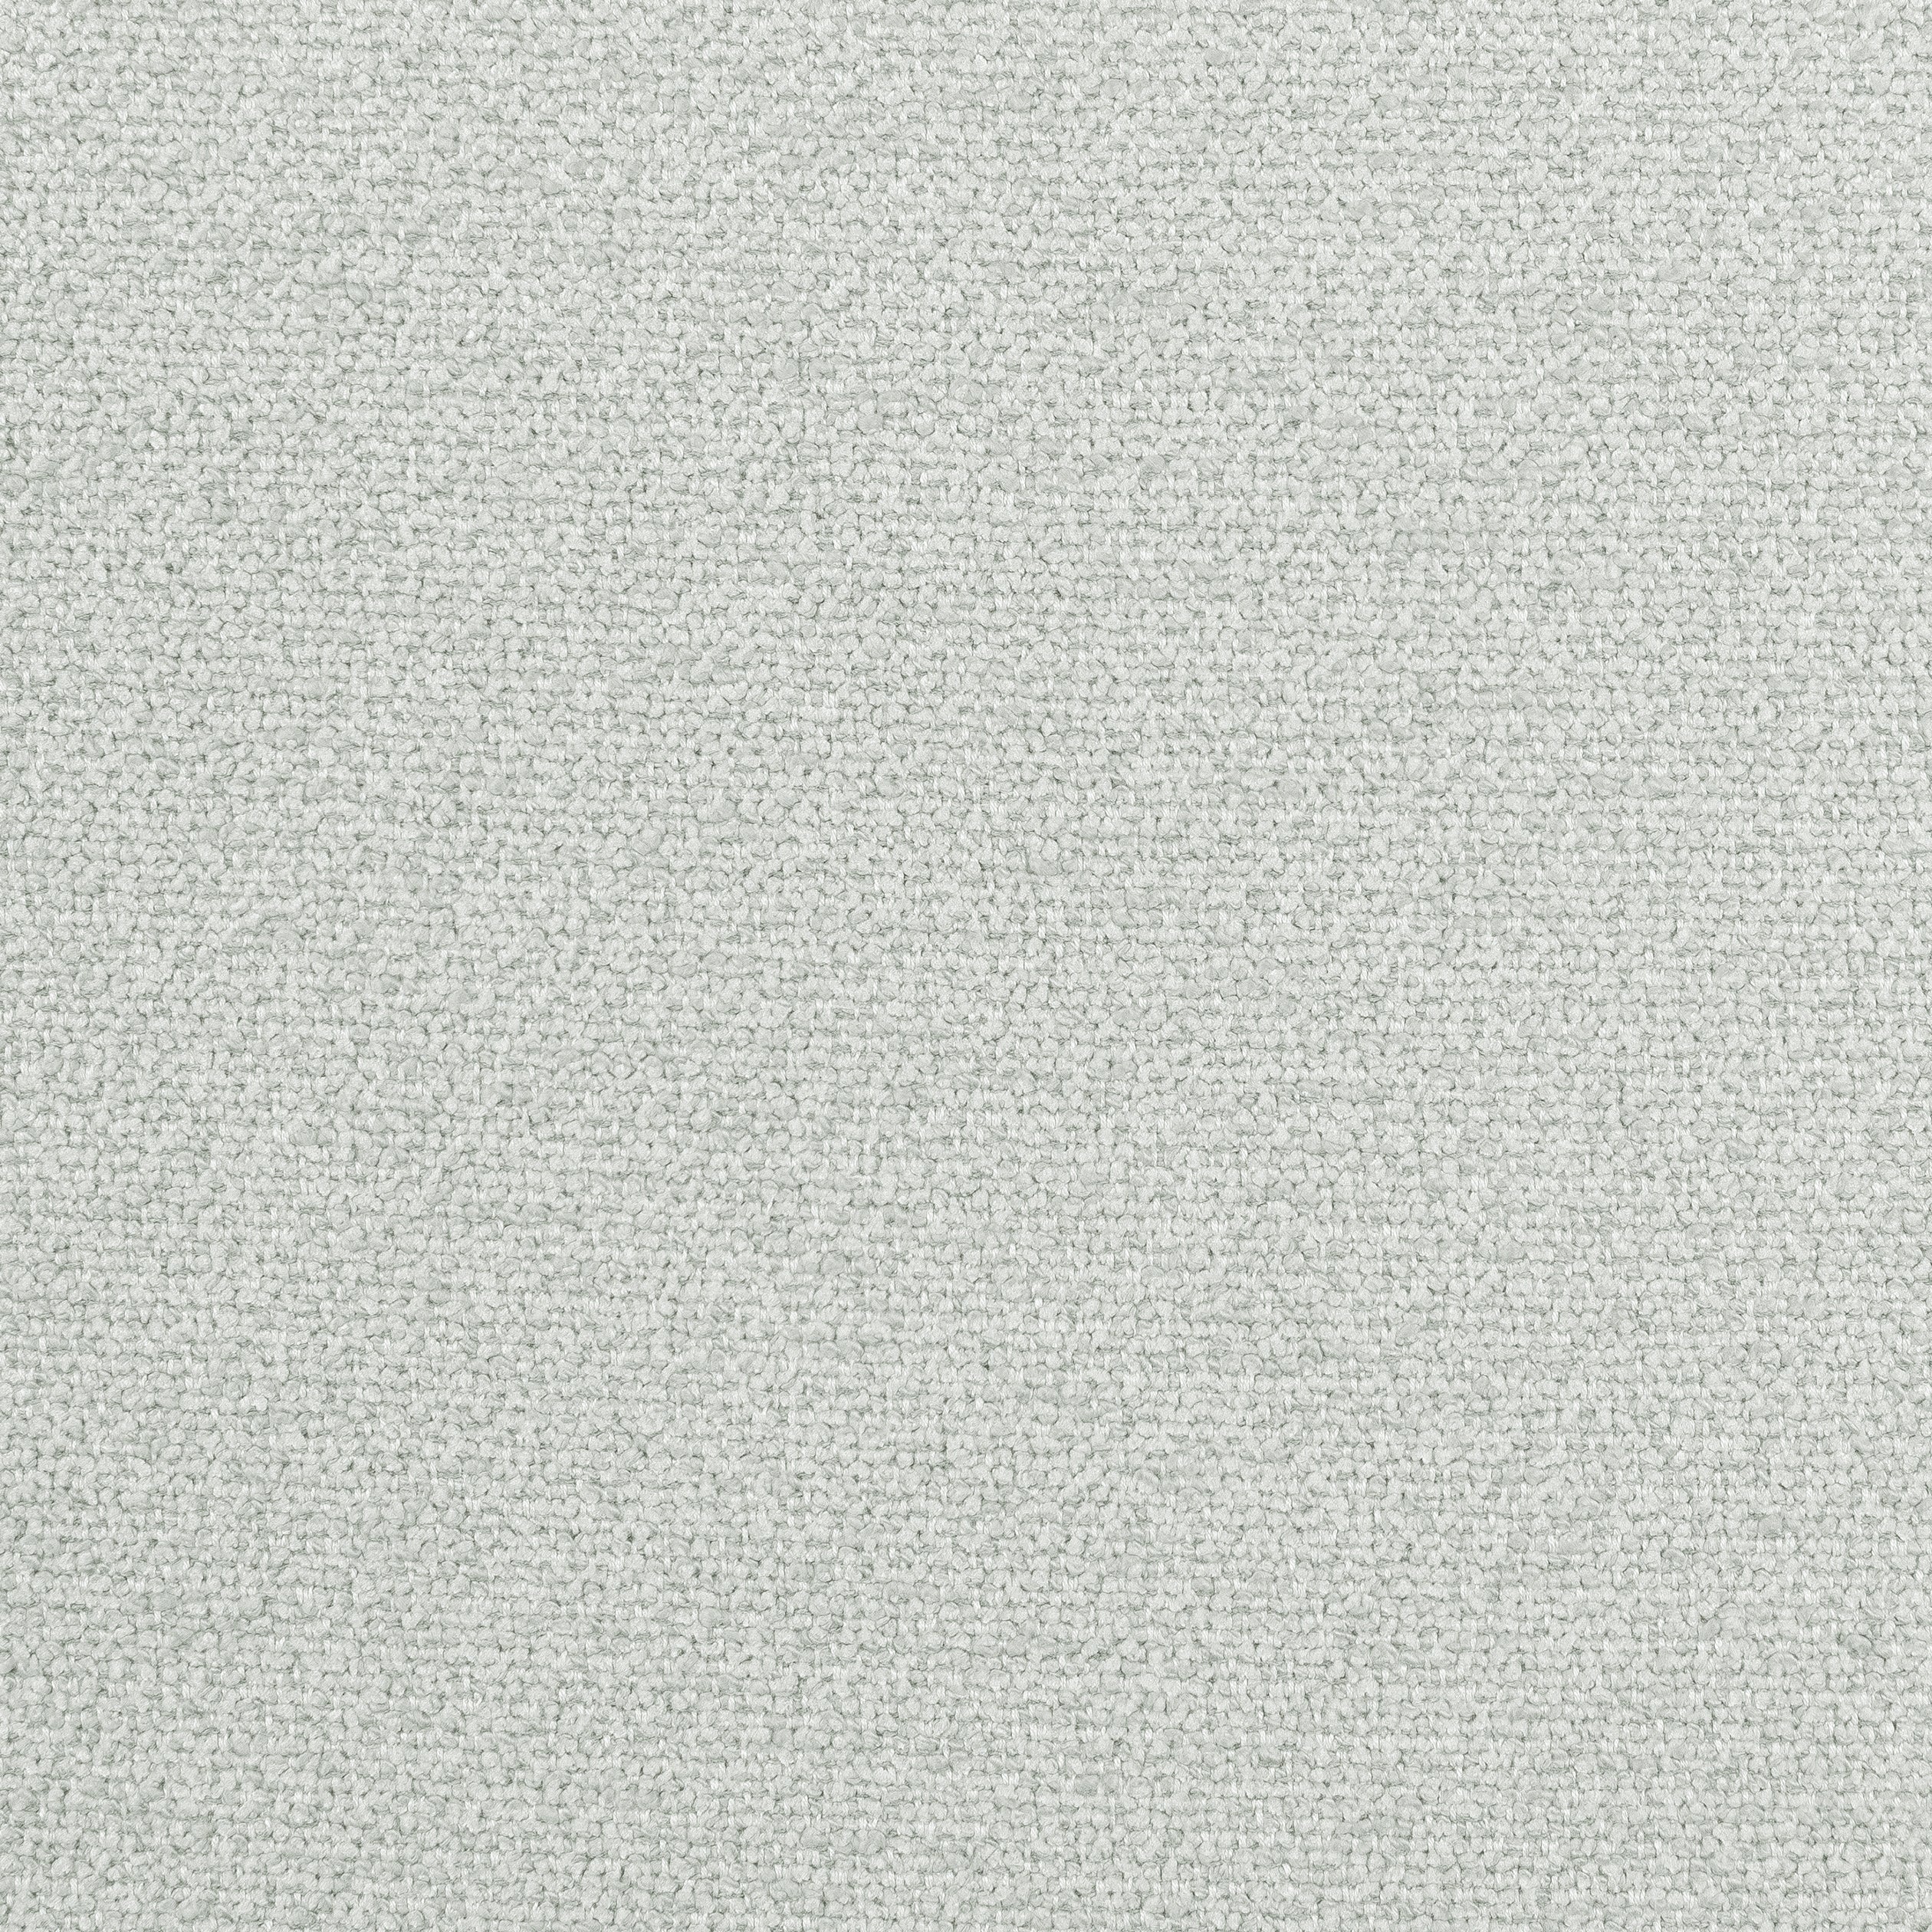 Dolcetto fabric in platinum color - pattern number W8138 - by Thibaut in the Sereno collection